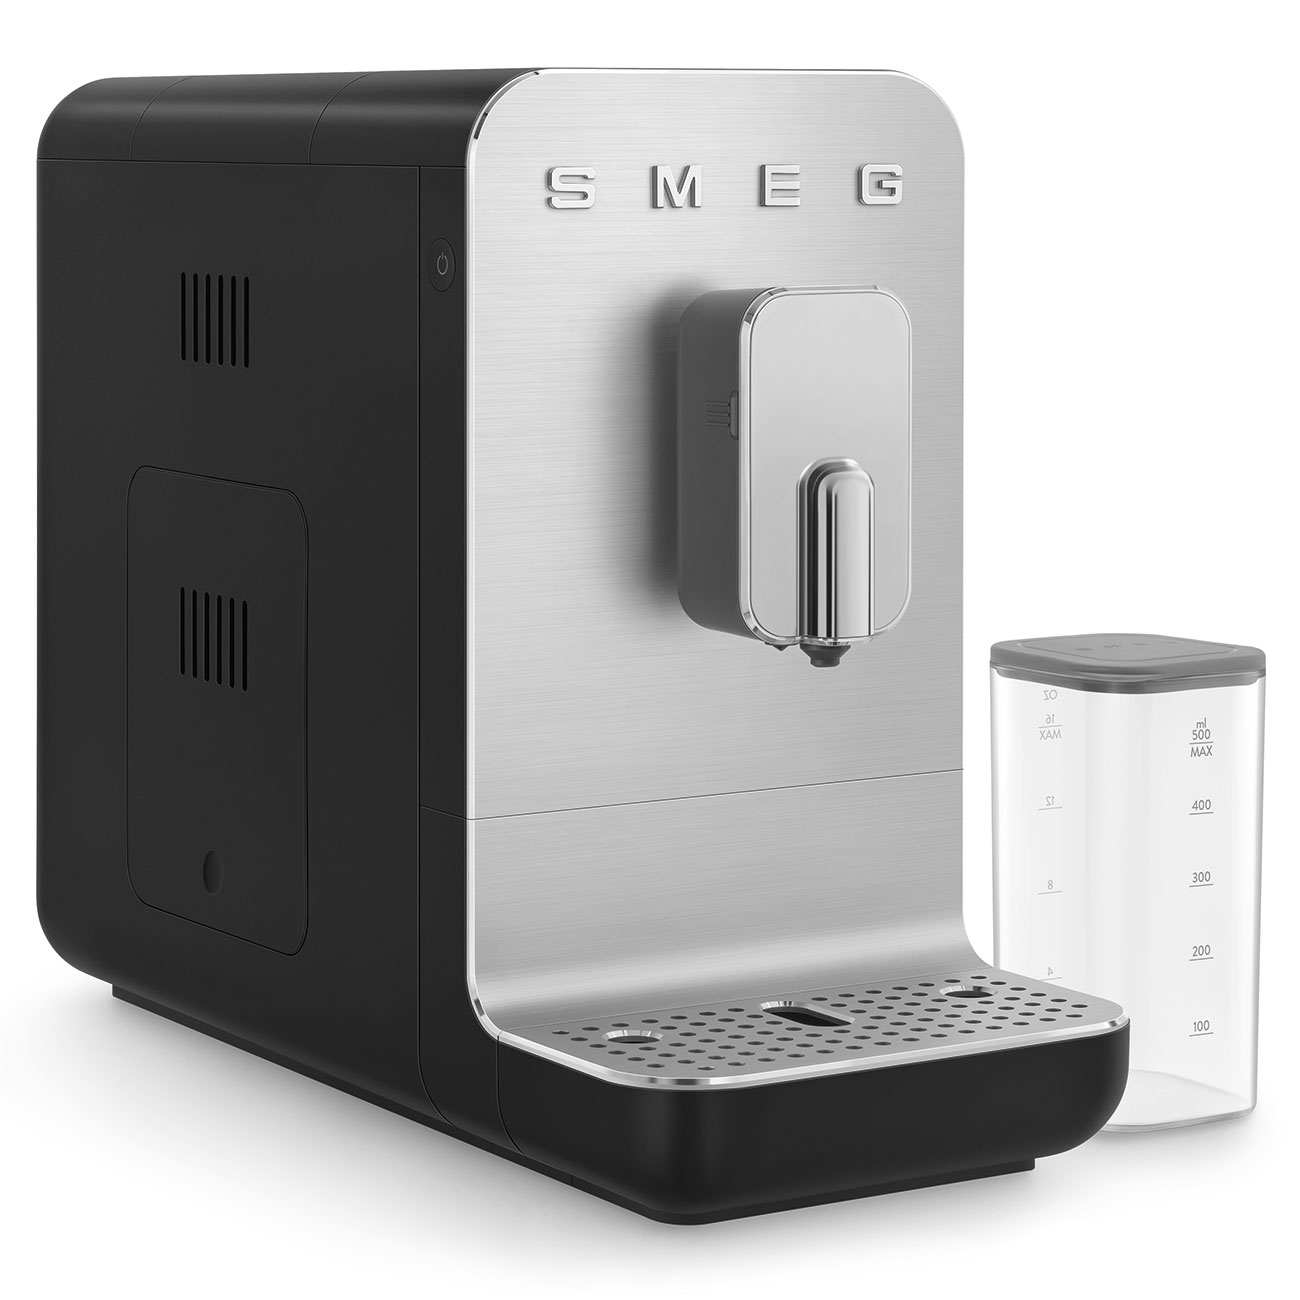 Smeg Black Bean To Cup Coffee Machine with integrated milk tank_6